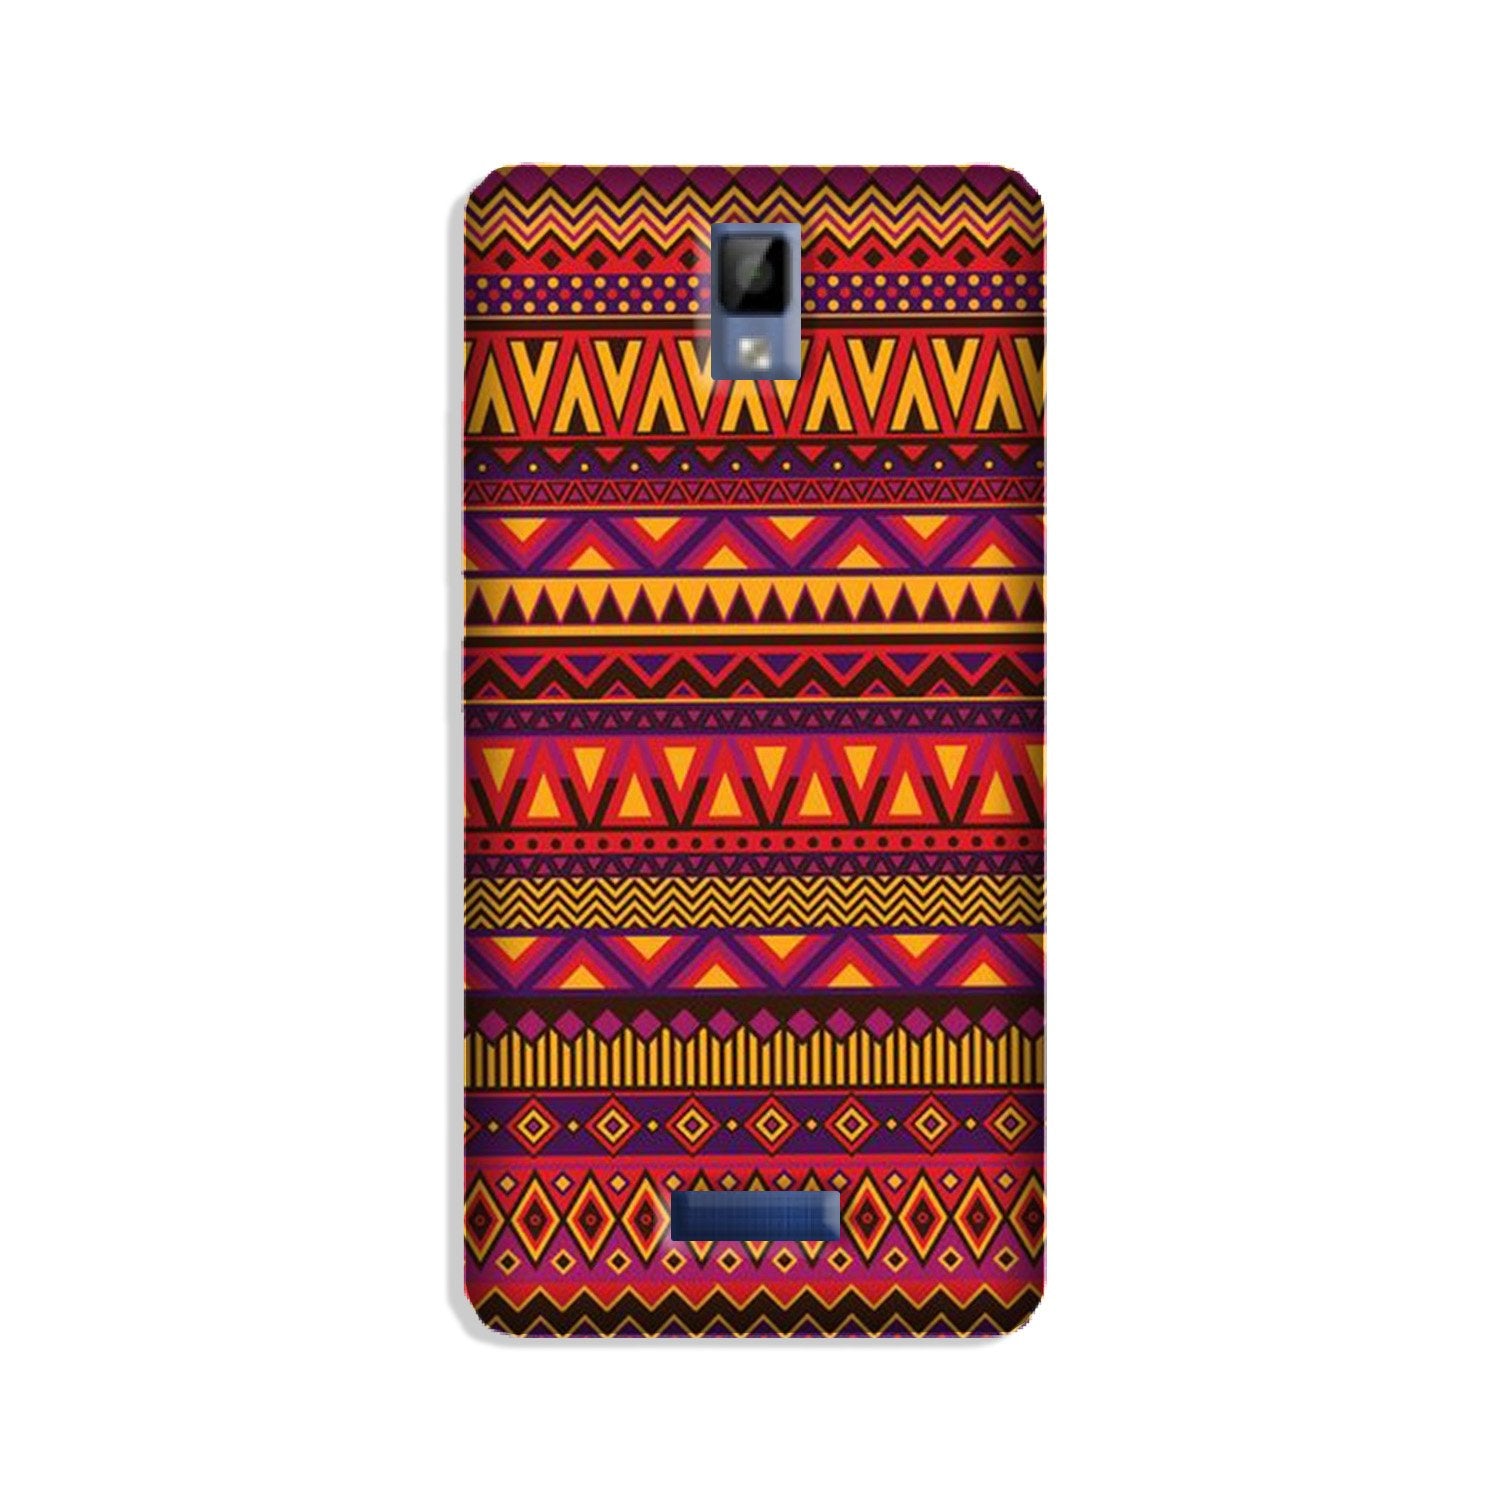 Zigzag line pattern2 Case for Gionee P7